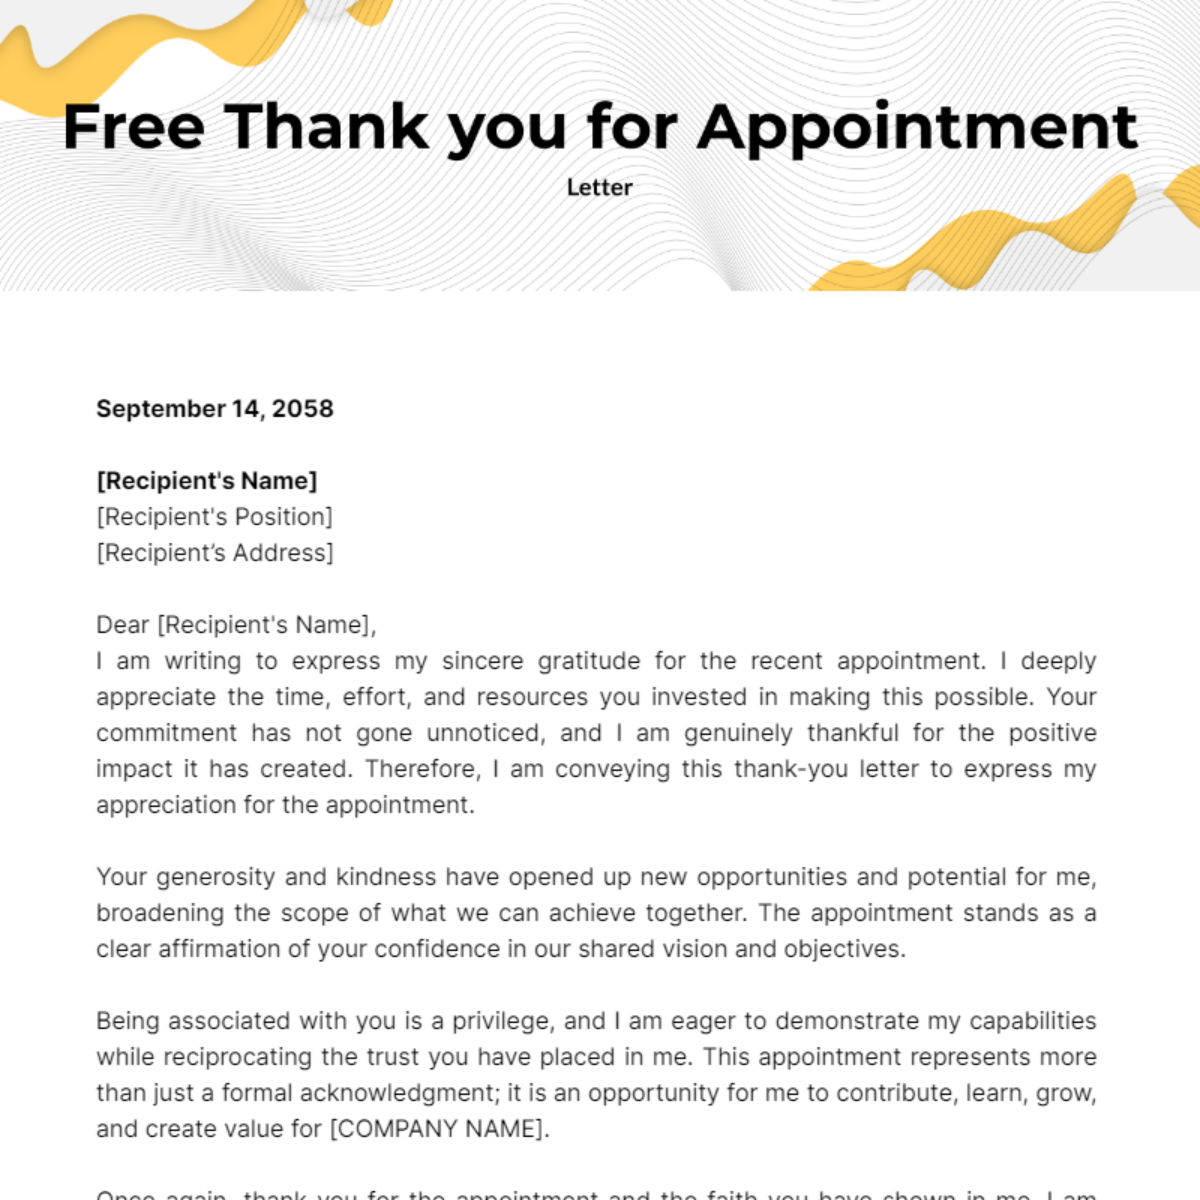 Thank you Letter for Appointment Template